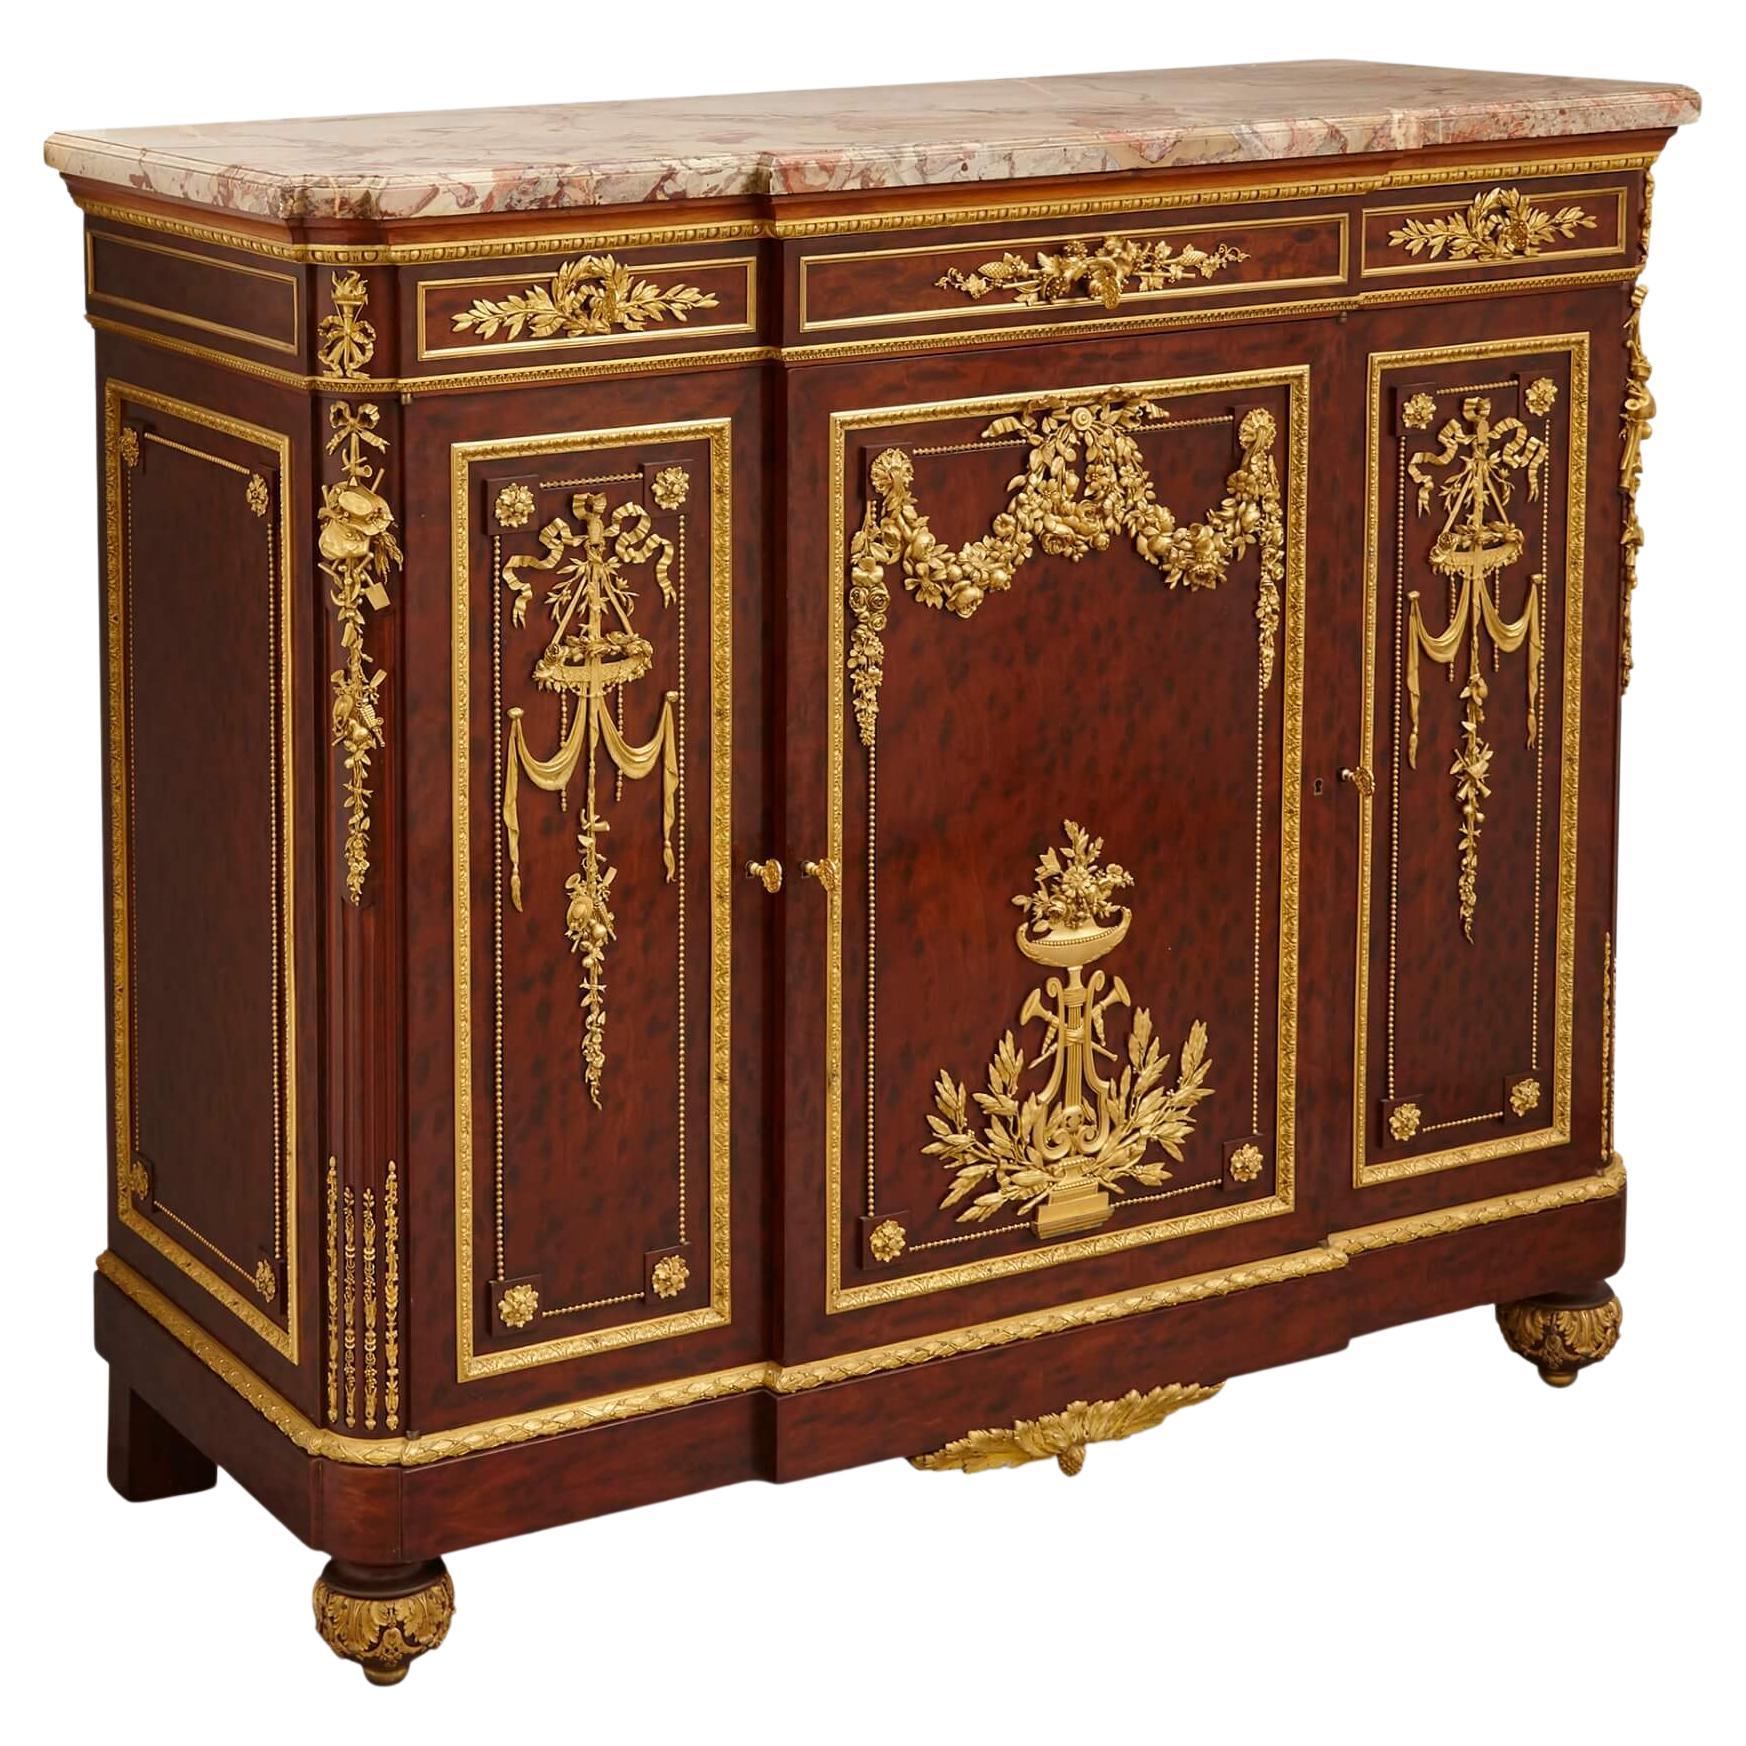 Antique French Mahogany and Ormolu Cabinet by Grohé Frères